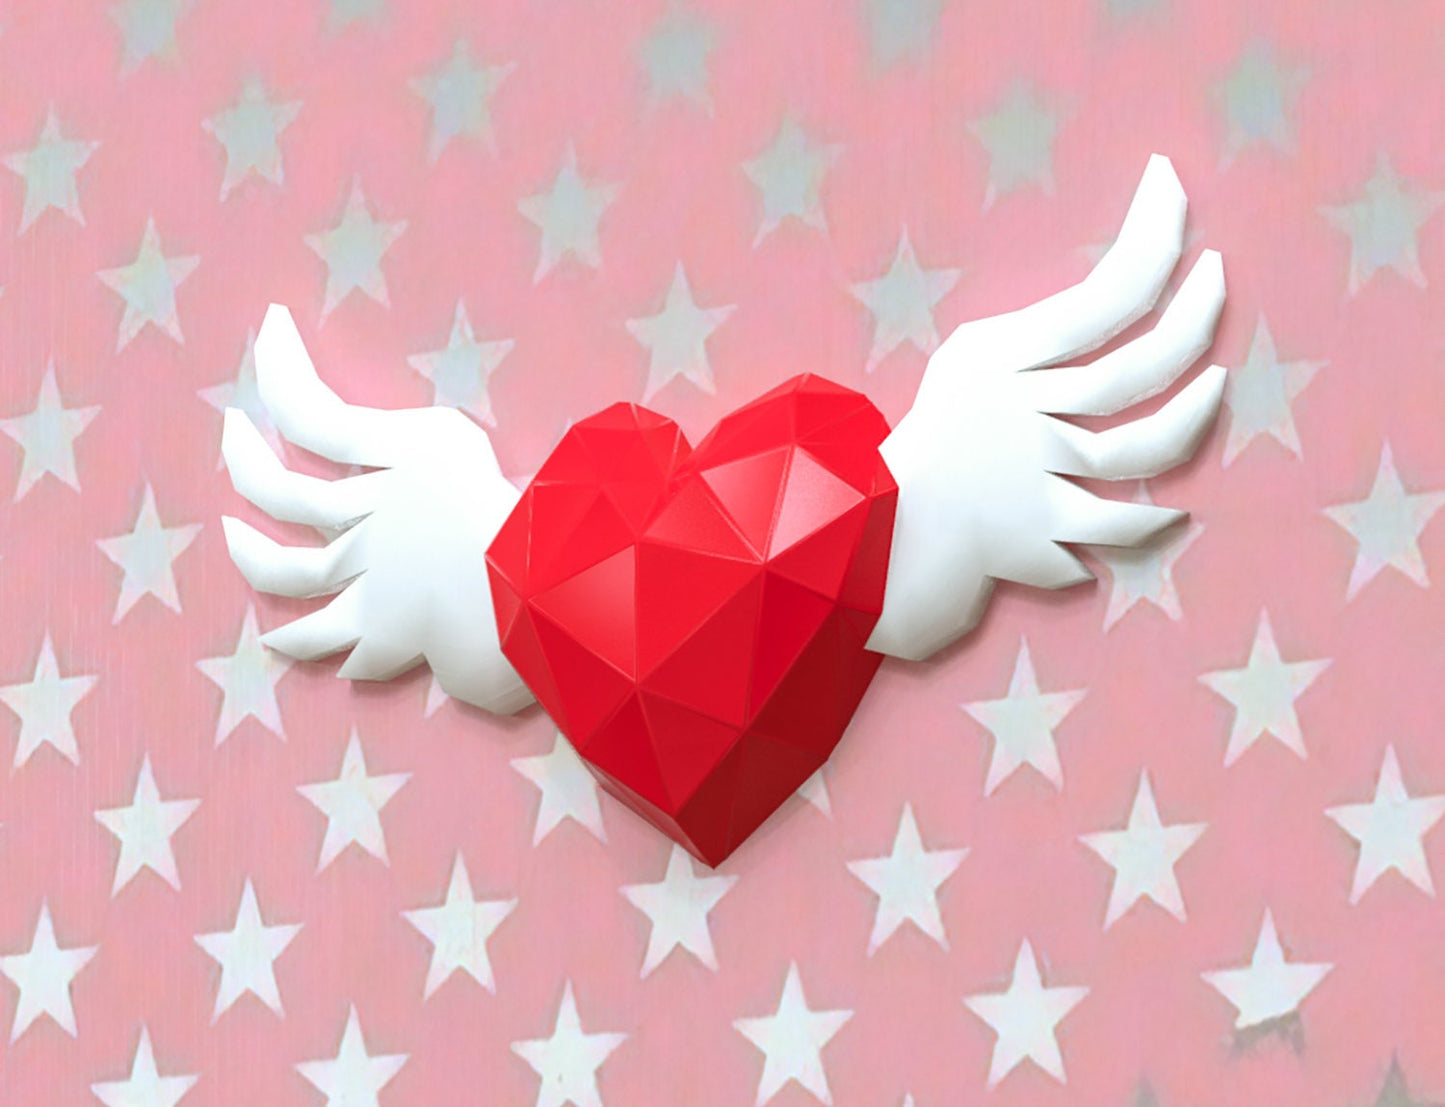 Valentine Heart with wings